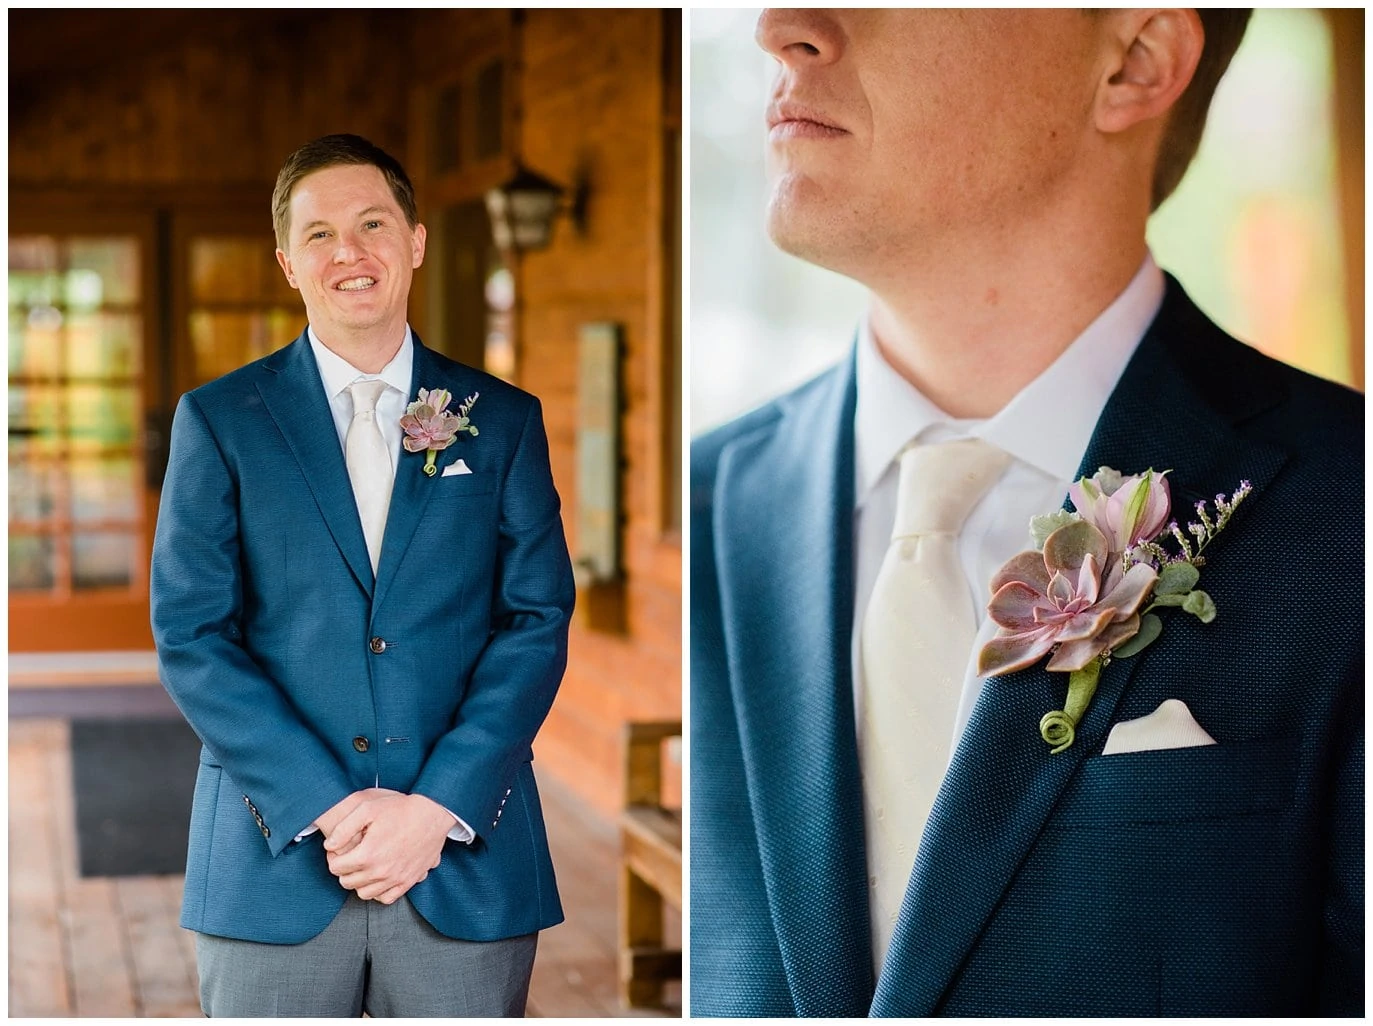 Groom in blue suit and succulent boutonniere photo